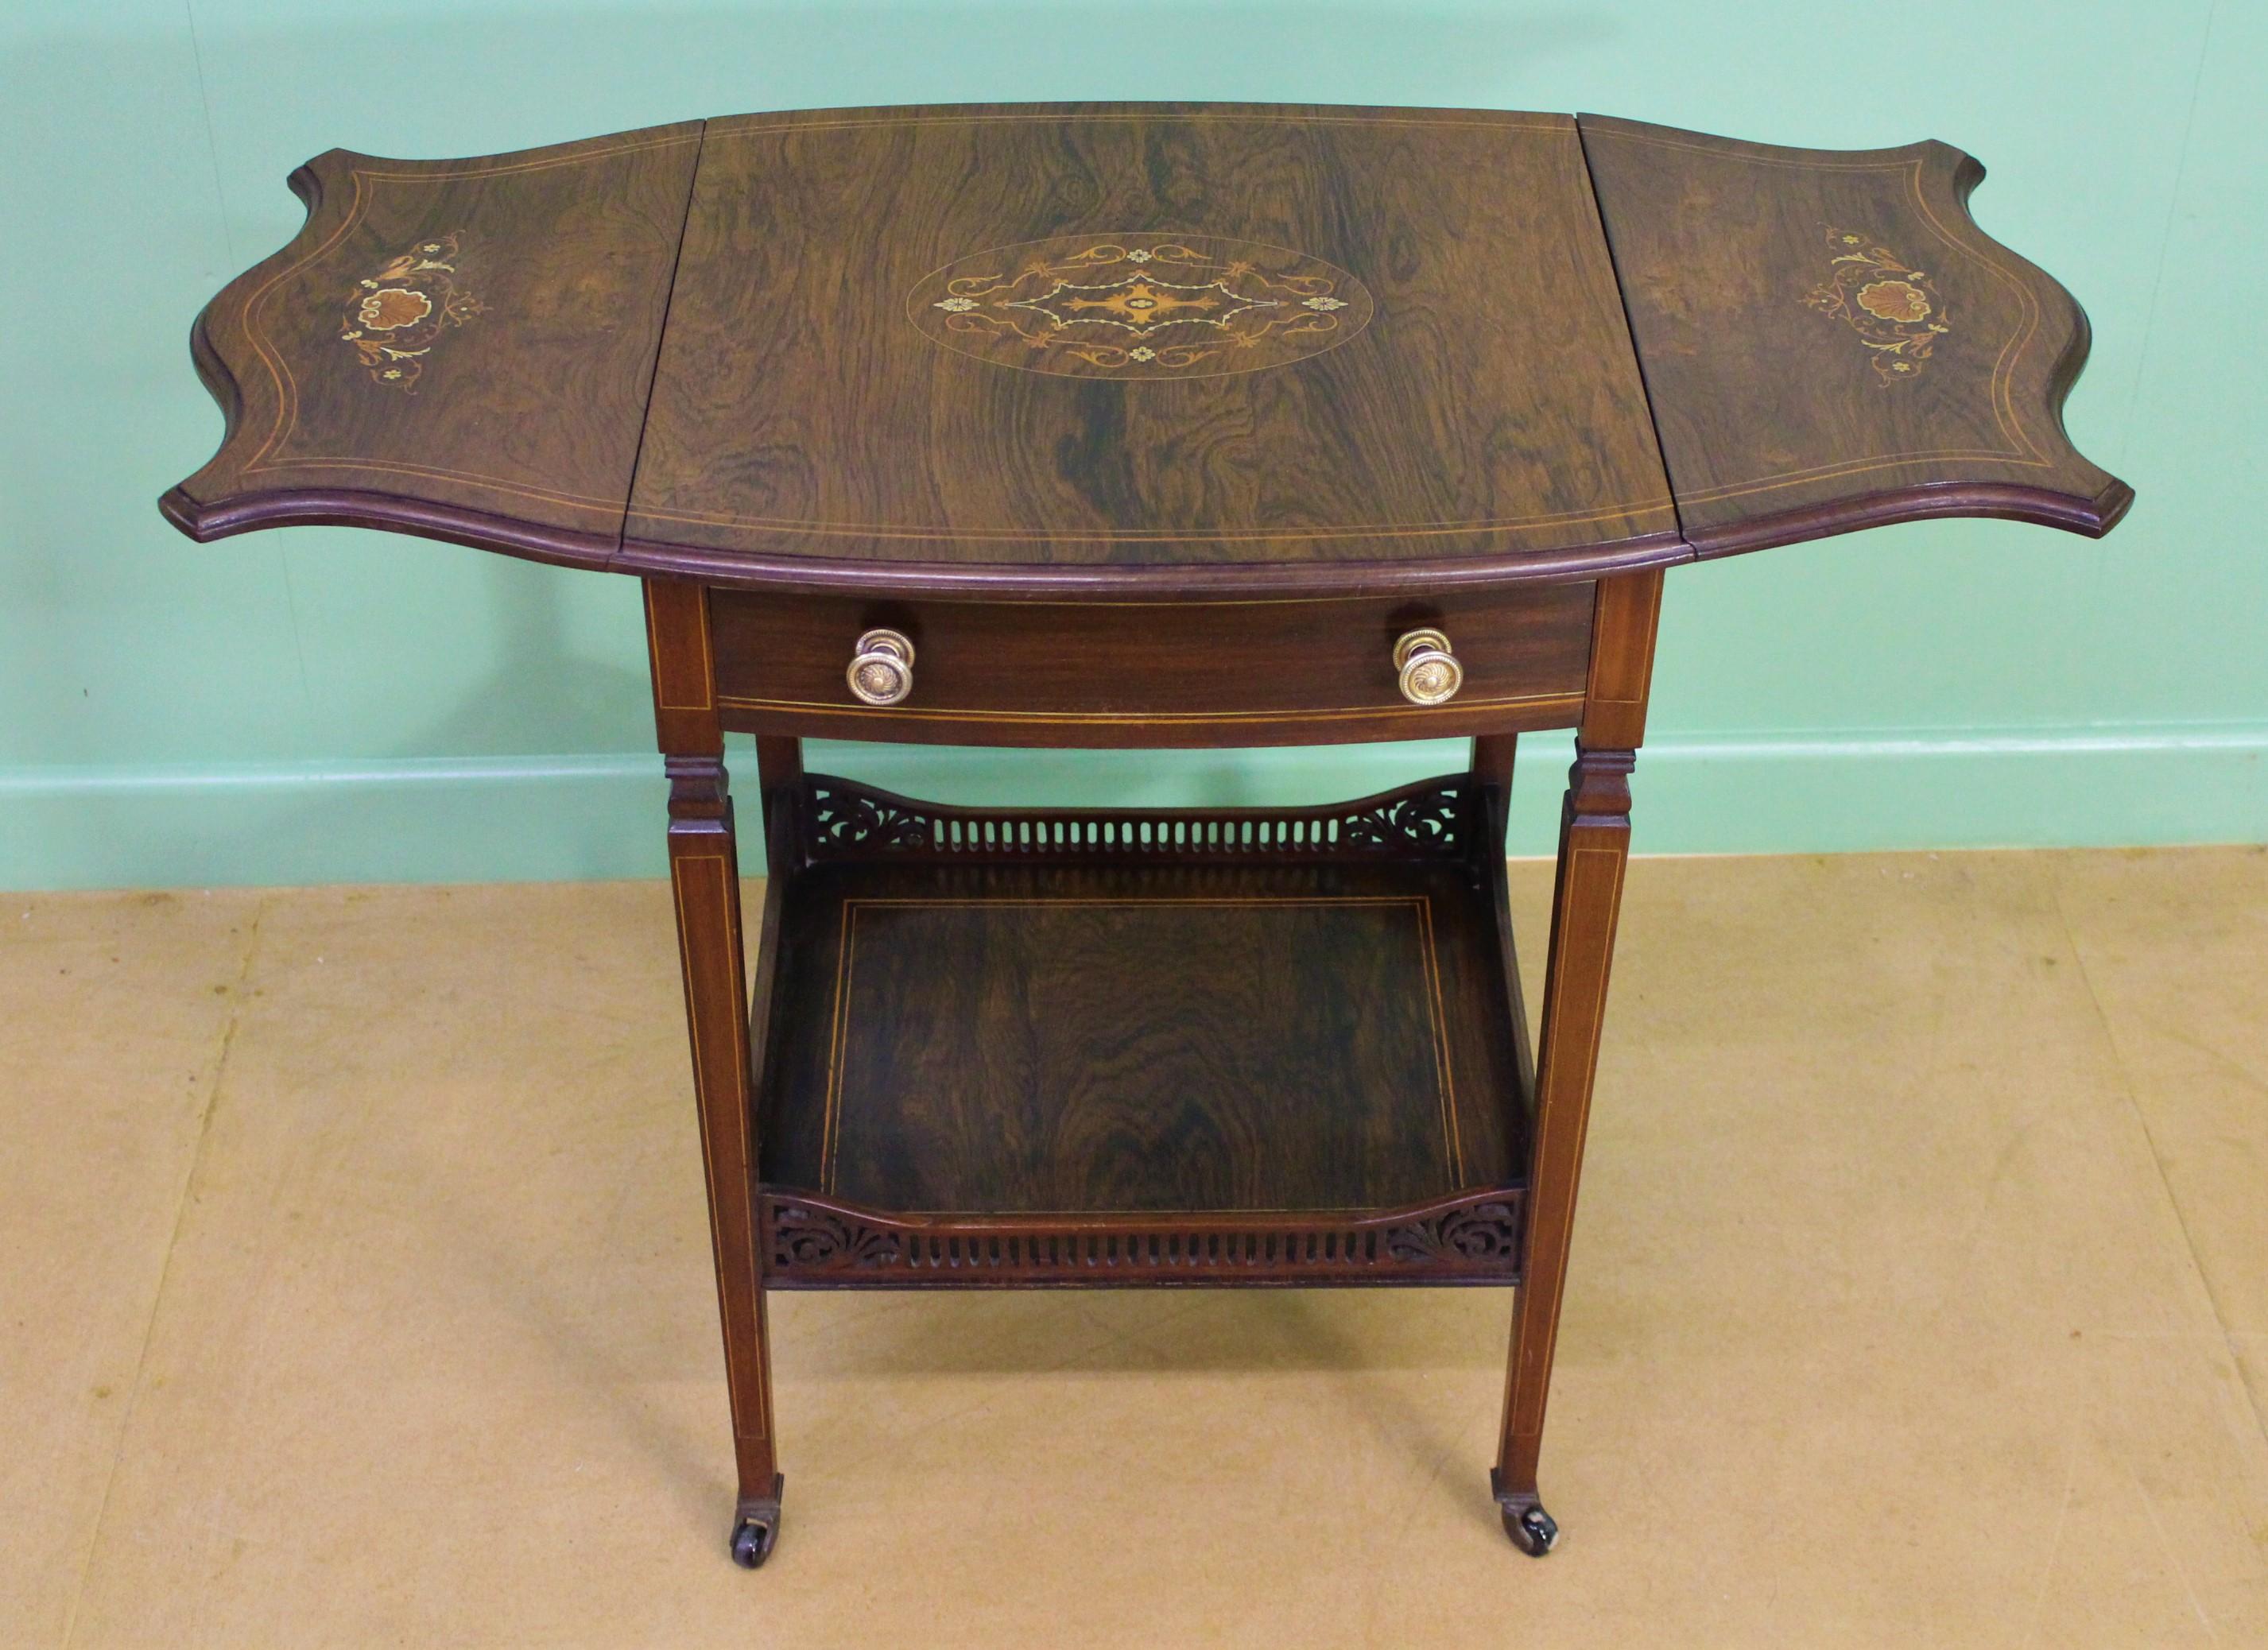 An excellent late Victorian period inlaid rosewood flap table. Well-constructed in solid mahogany with attractive rosewood veneers. Decorated with inlaid stringing throughout and floral panels to the top and each of the flaps. With a single drawer